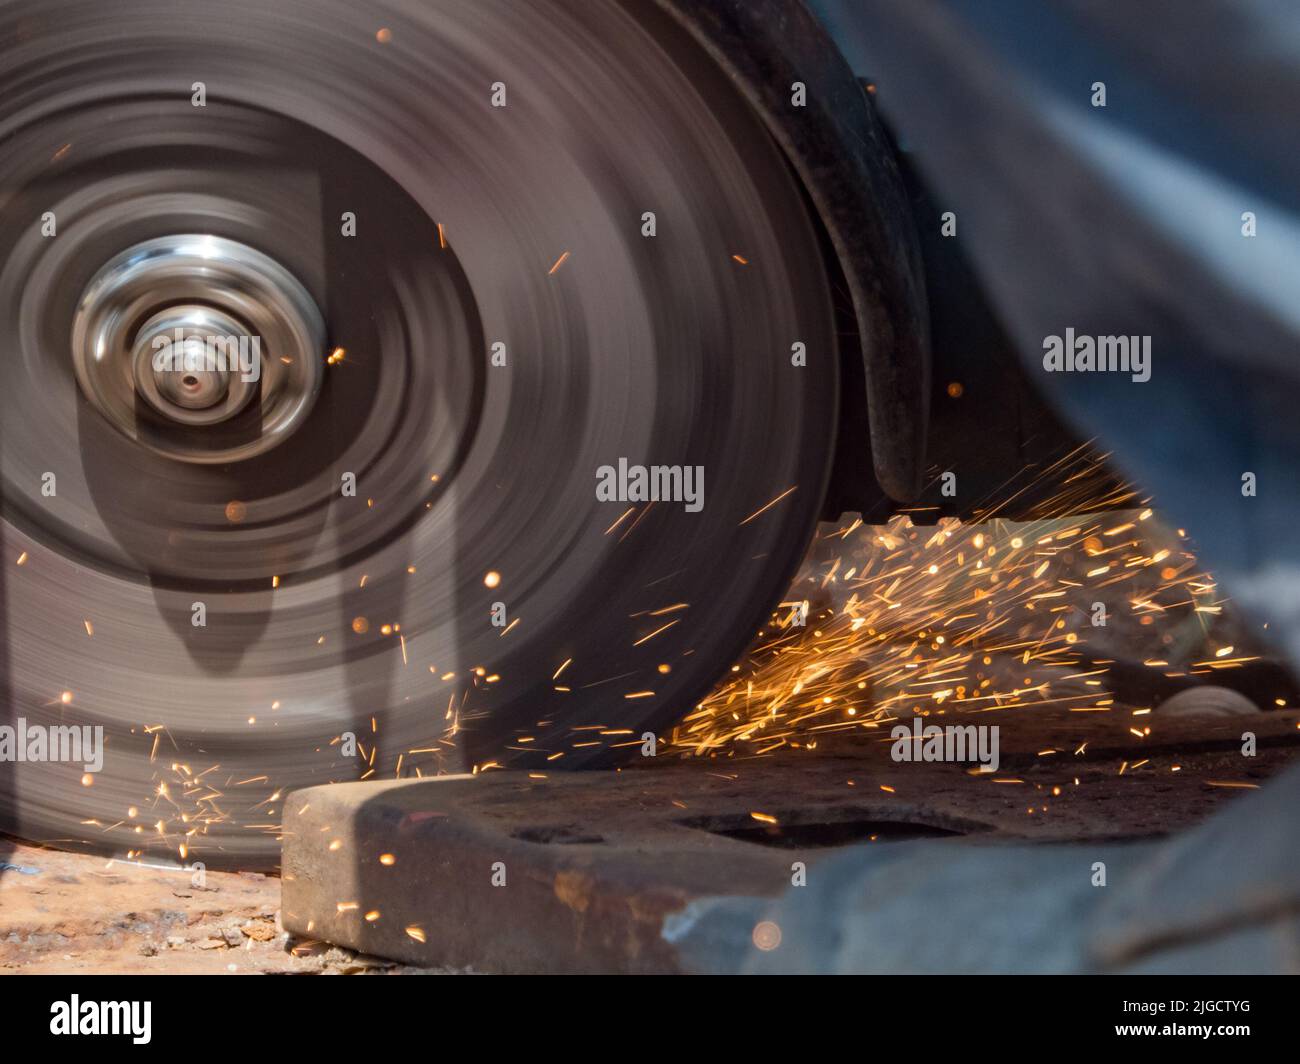 A grinder is grinding quickly and sparks are flying around Stock Photo